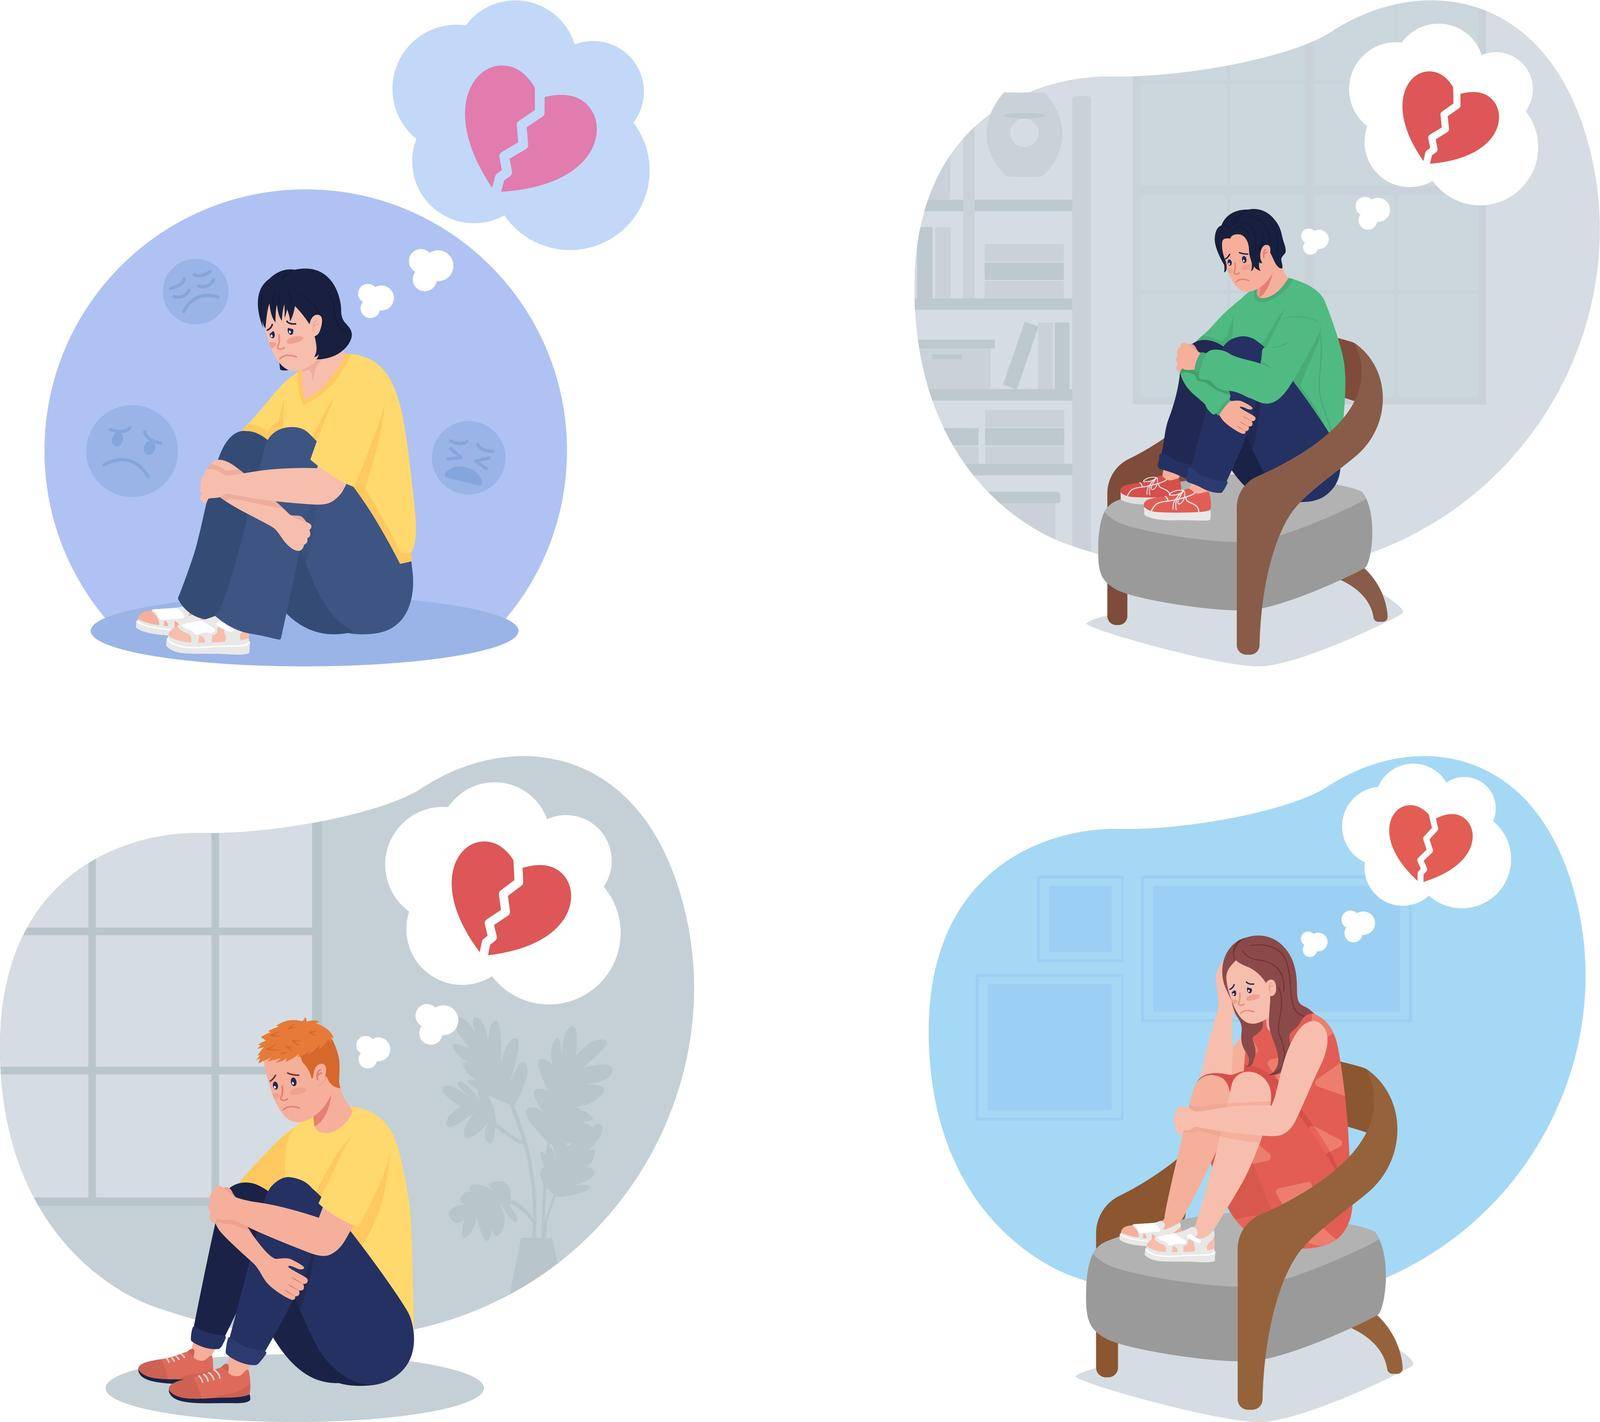 Lonely teen upset over breakup 2D vector isolated illustration set by ntl